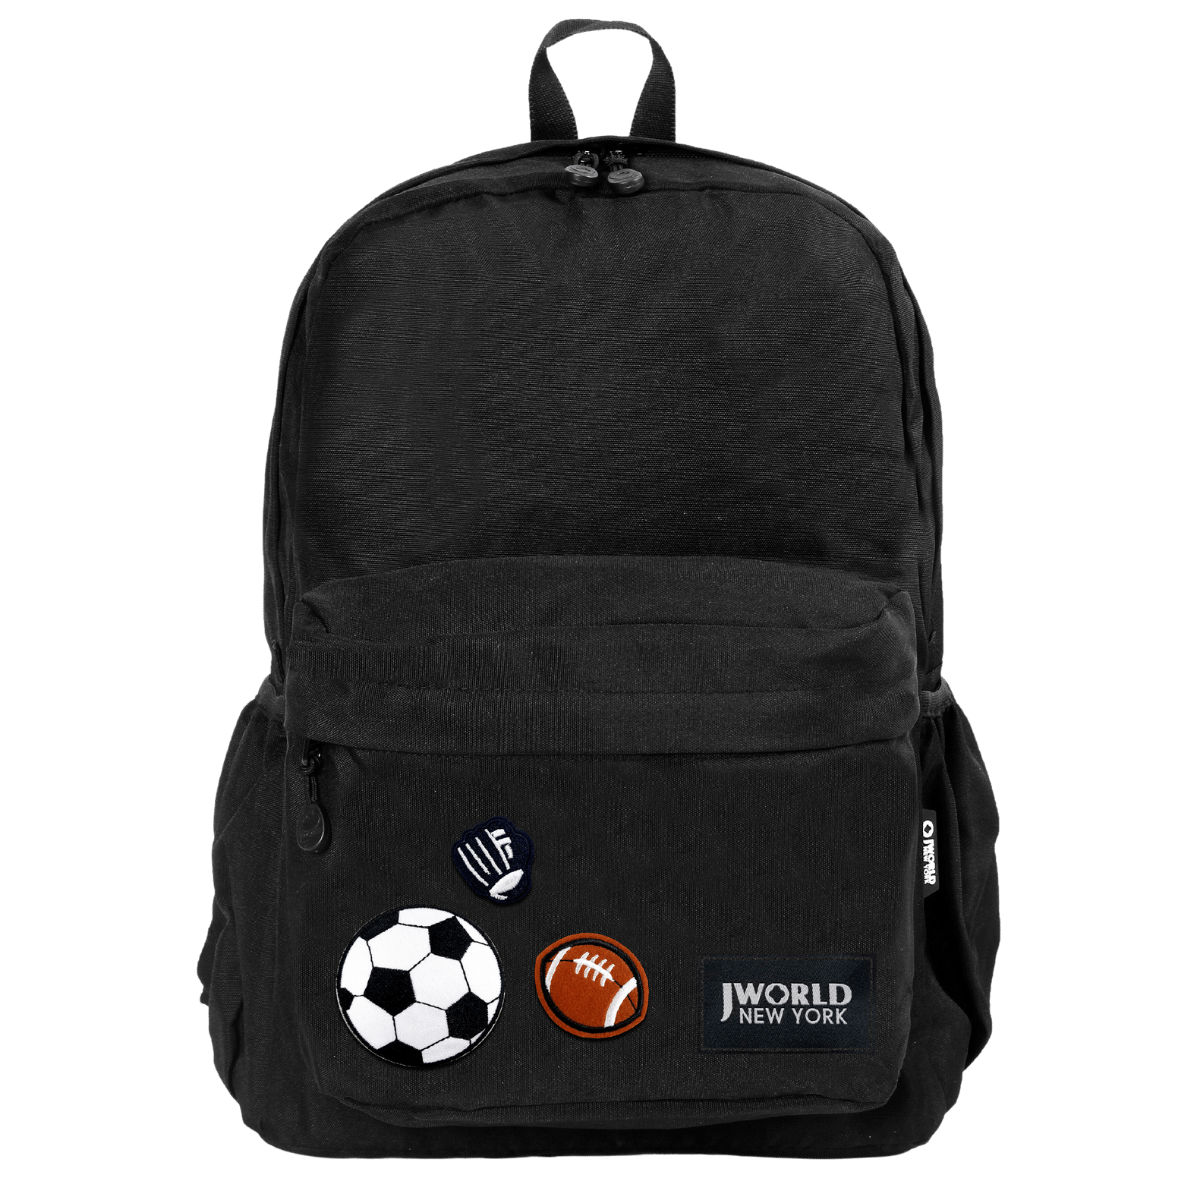 Soccer Ball Patch Football Futebol Fútbol Embroidered Iron-on N1